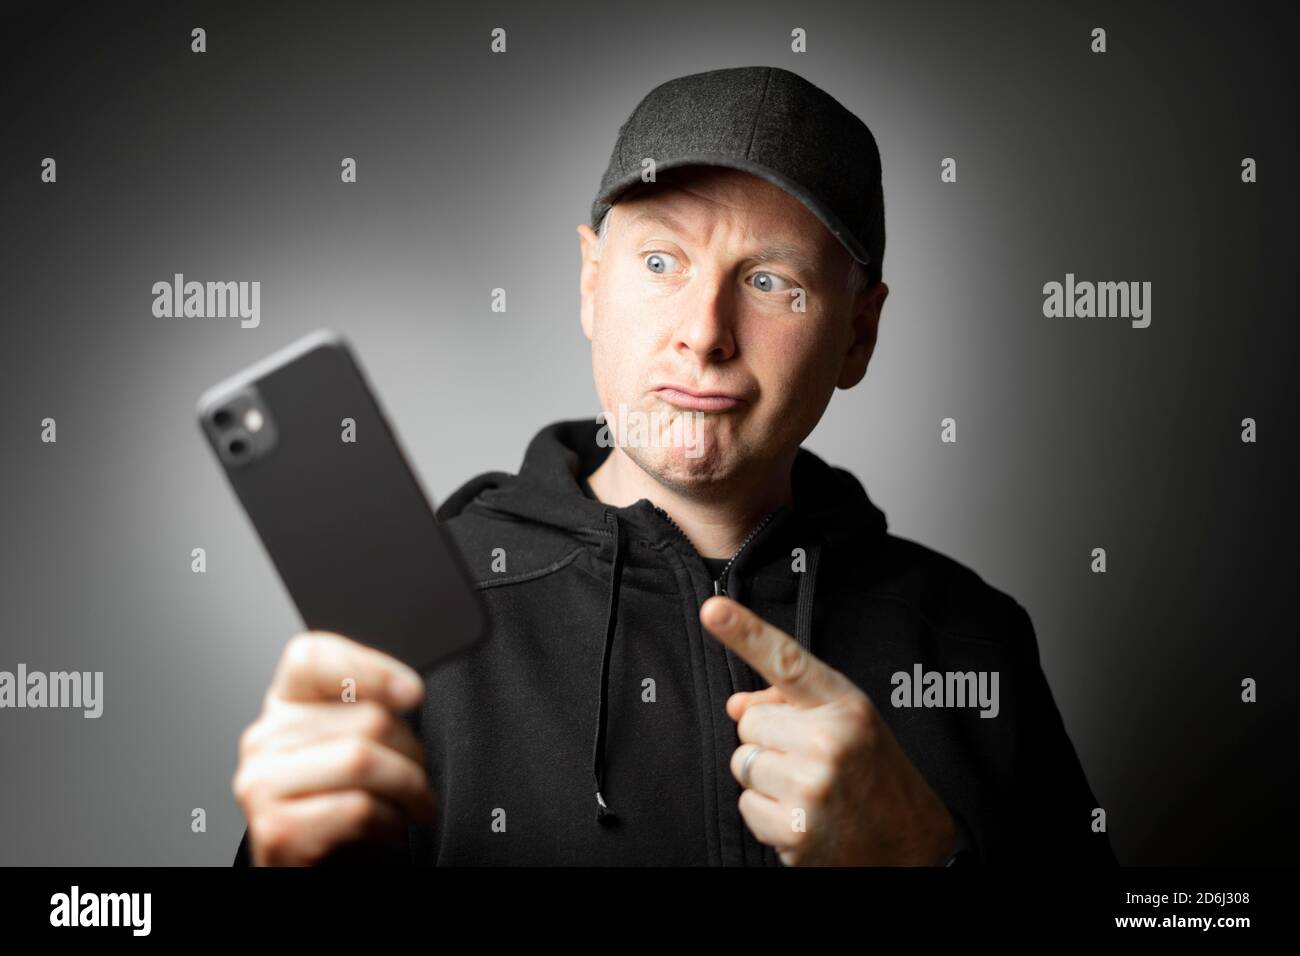 Man in black clothes pointing to the message on the phone or the phone itself Stock Photo